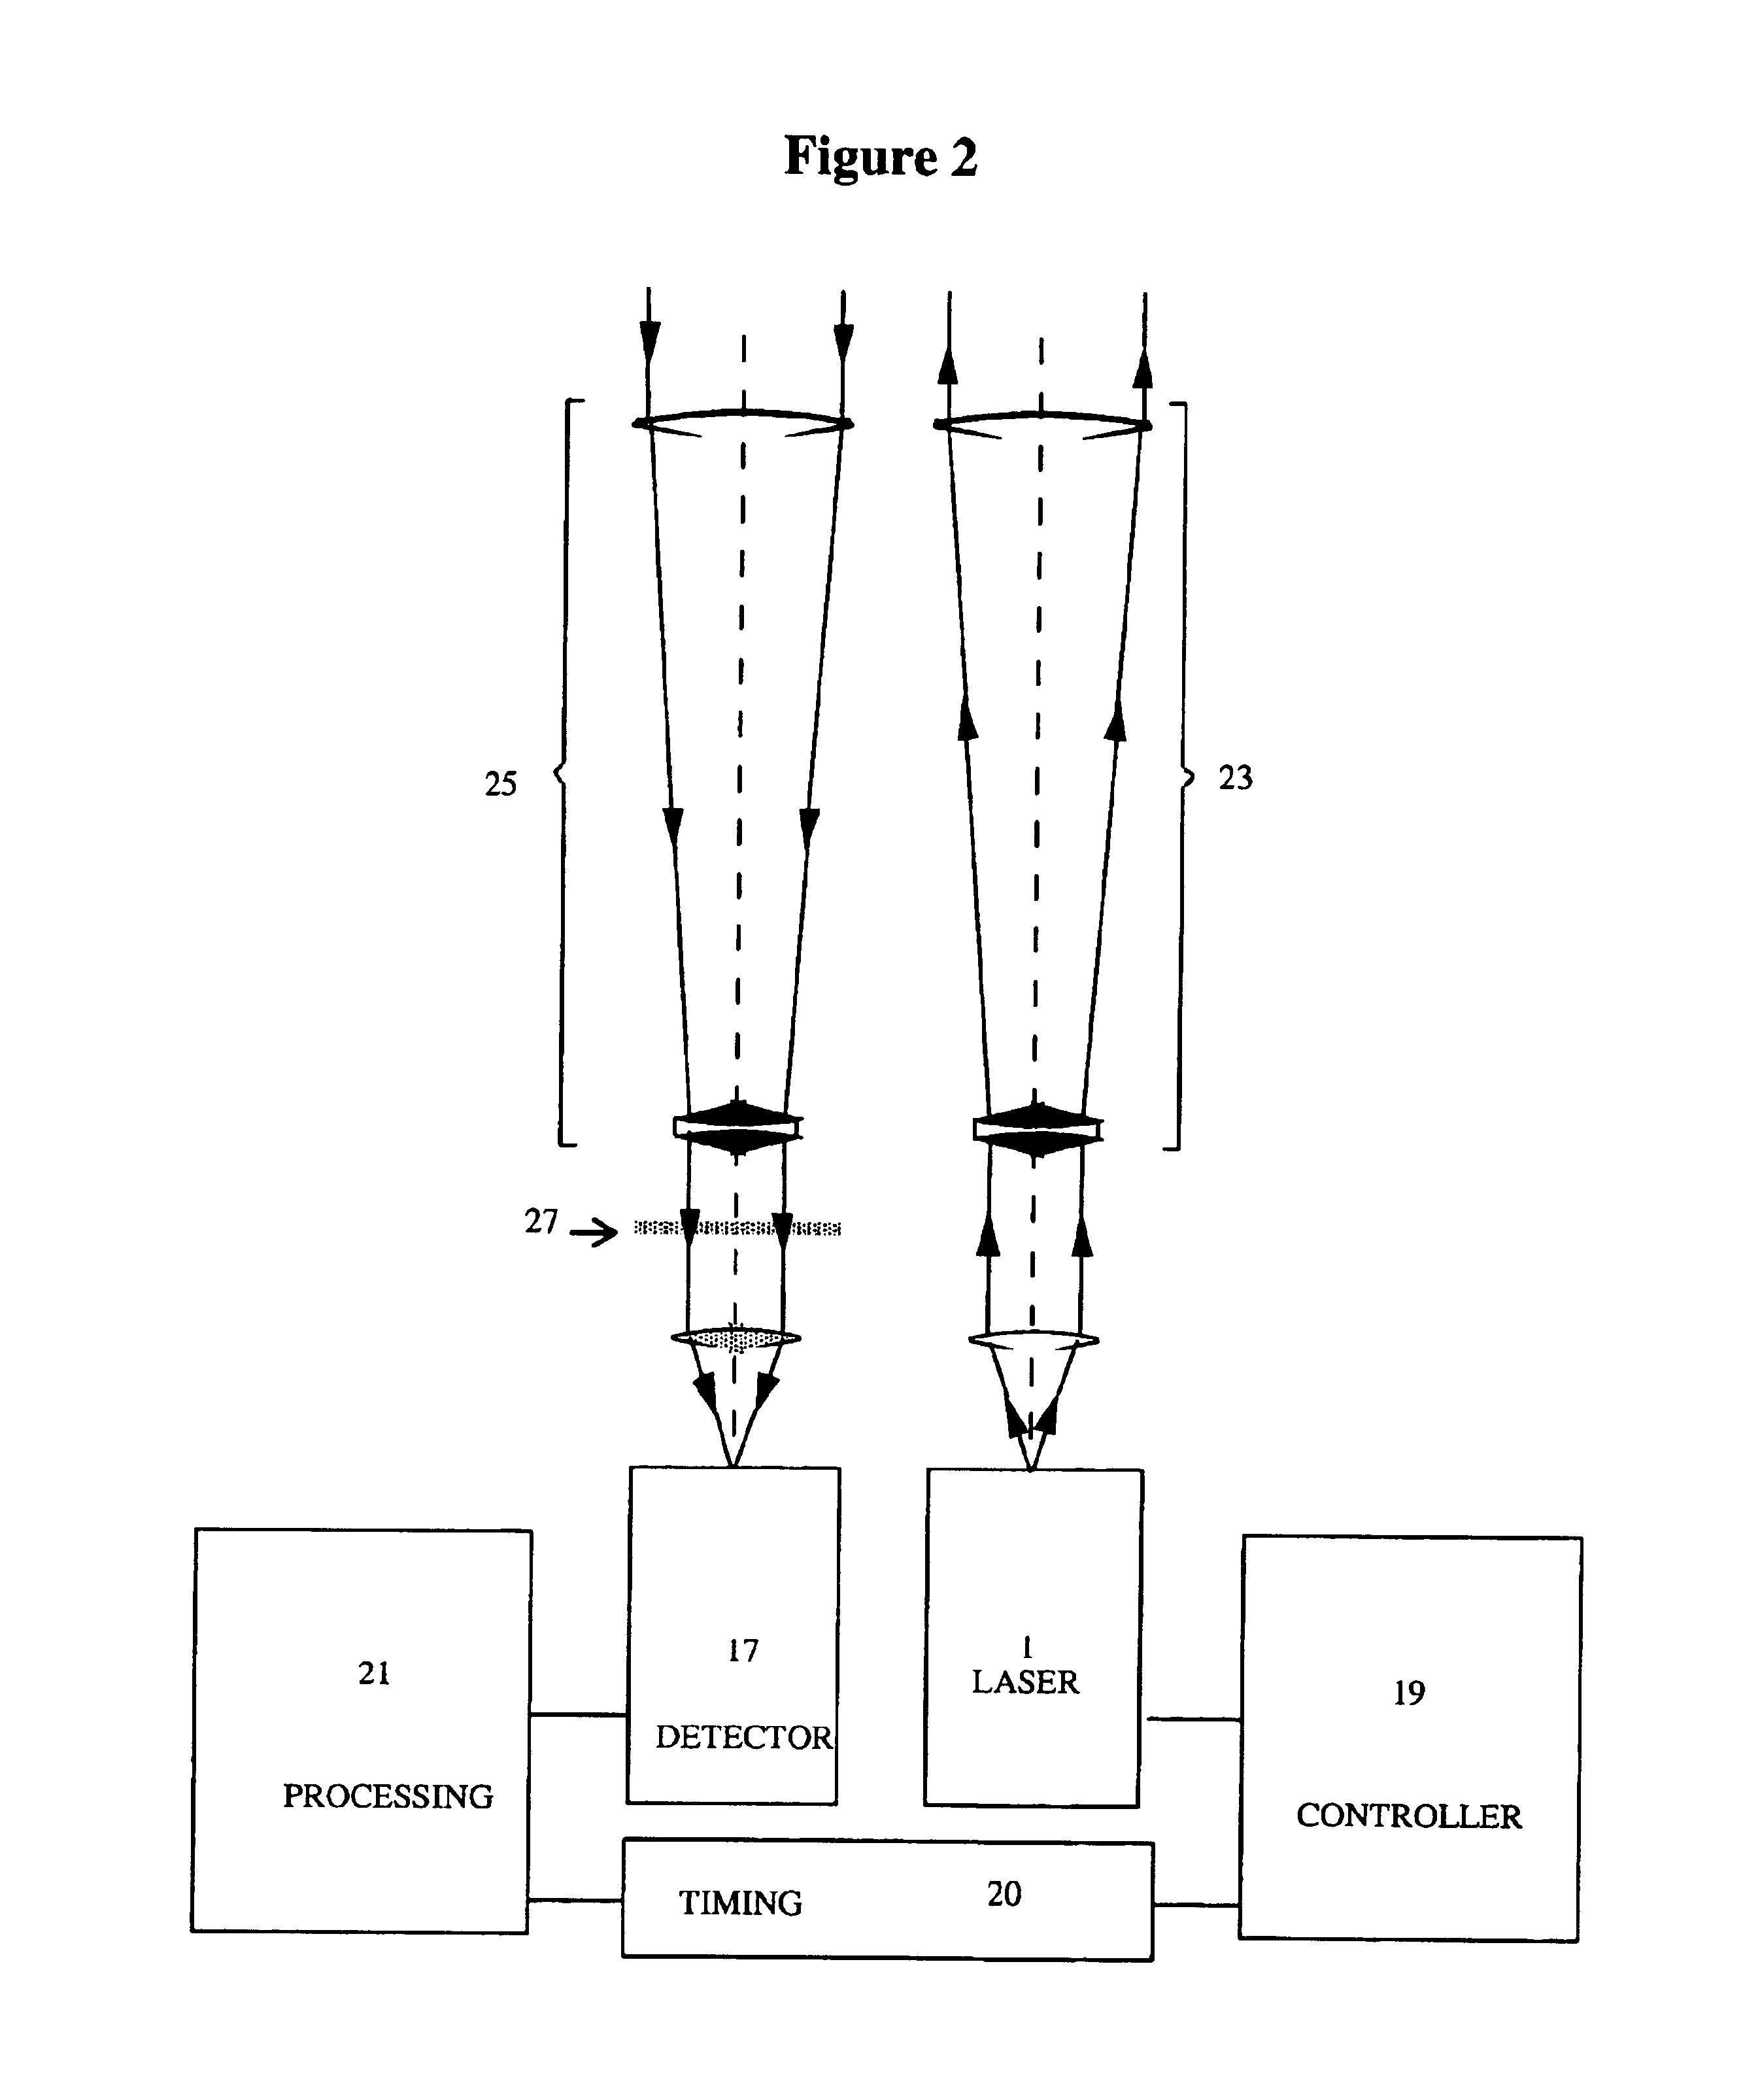 Apparatus for and method of optical detection and analysis of an object